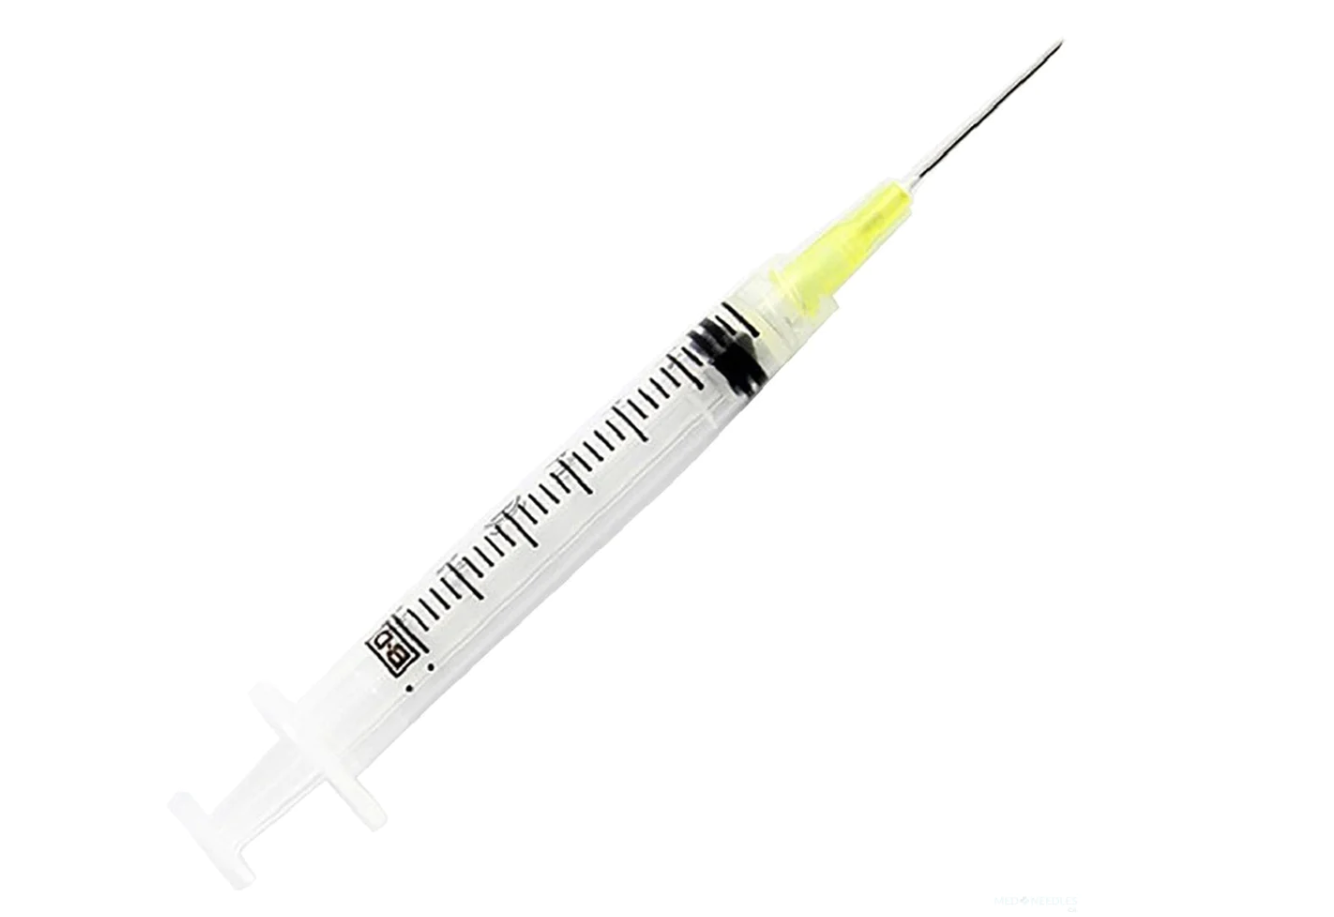 BD 309578 Luer-Lok™ Syringes with PrecisionGlide™ Needles |3mL | 20G x 1" -  200 per Order